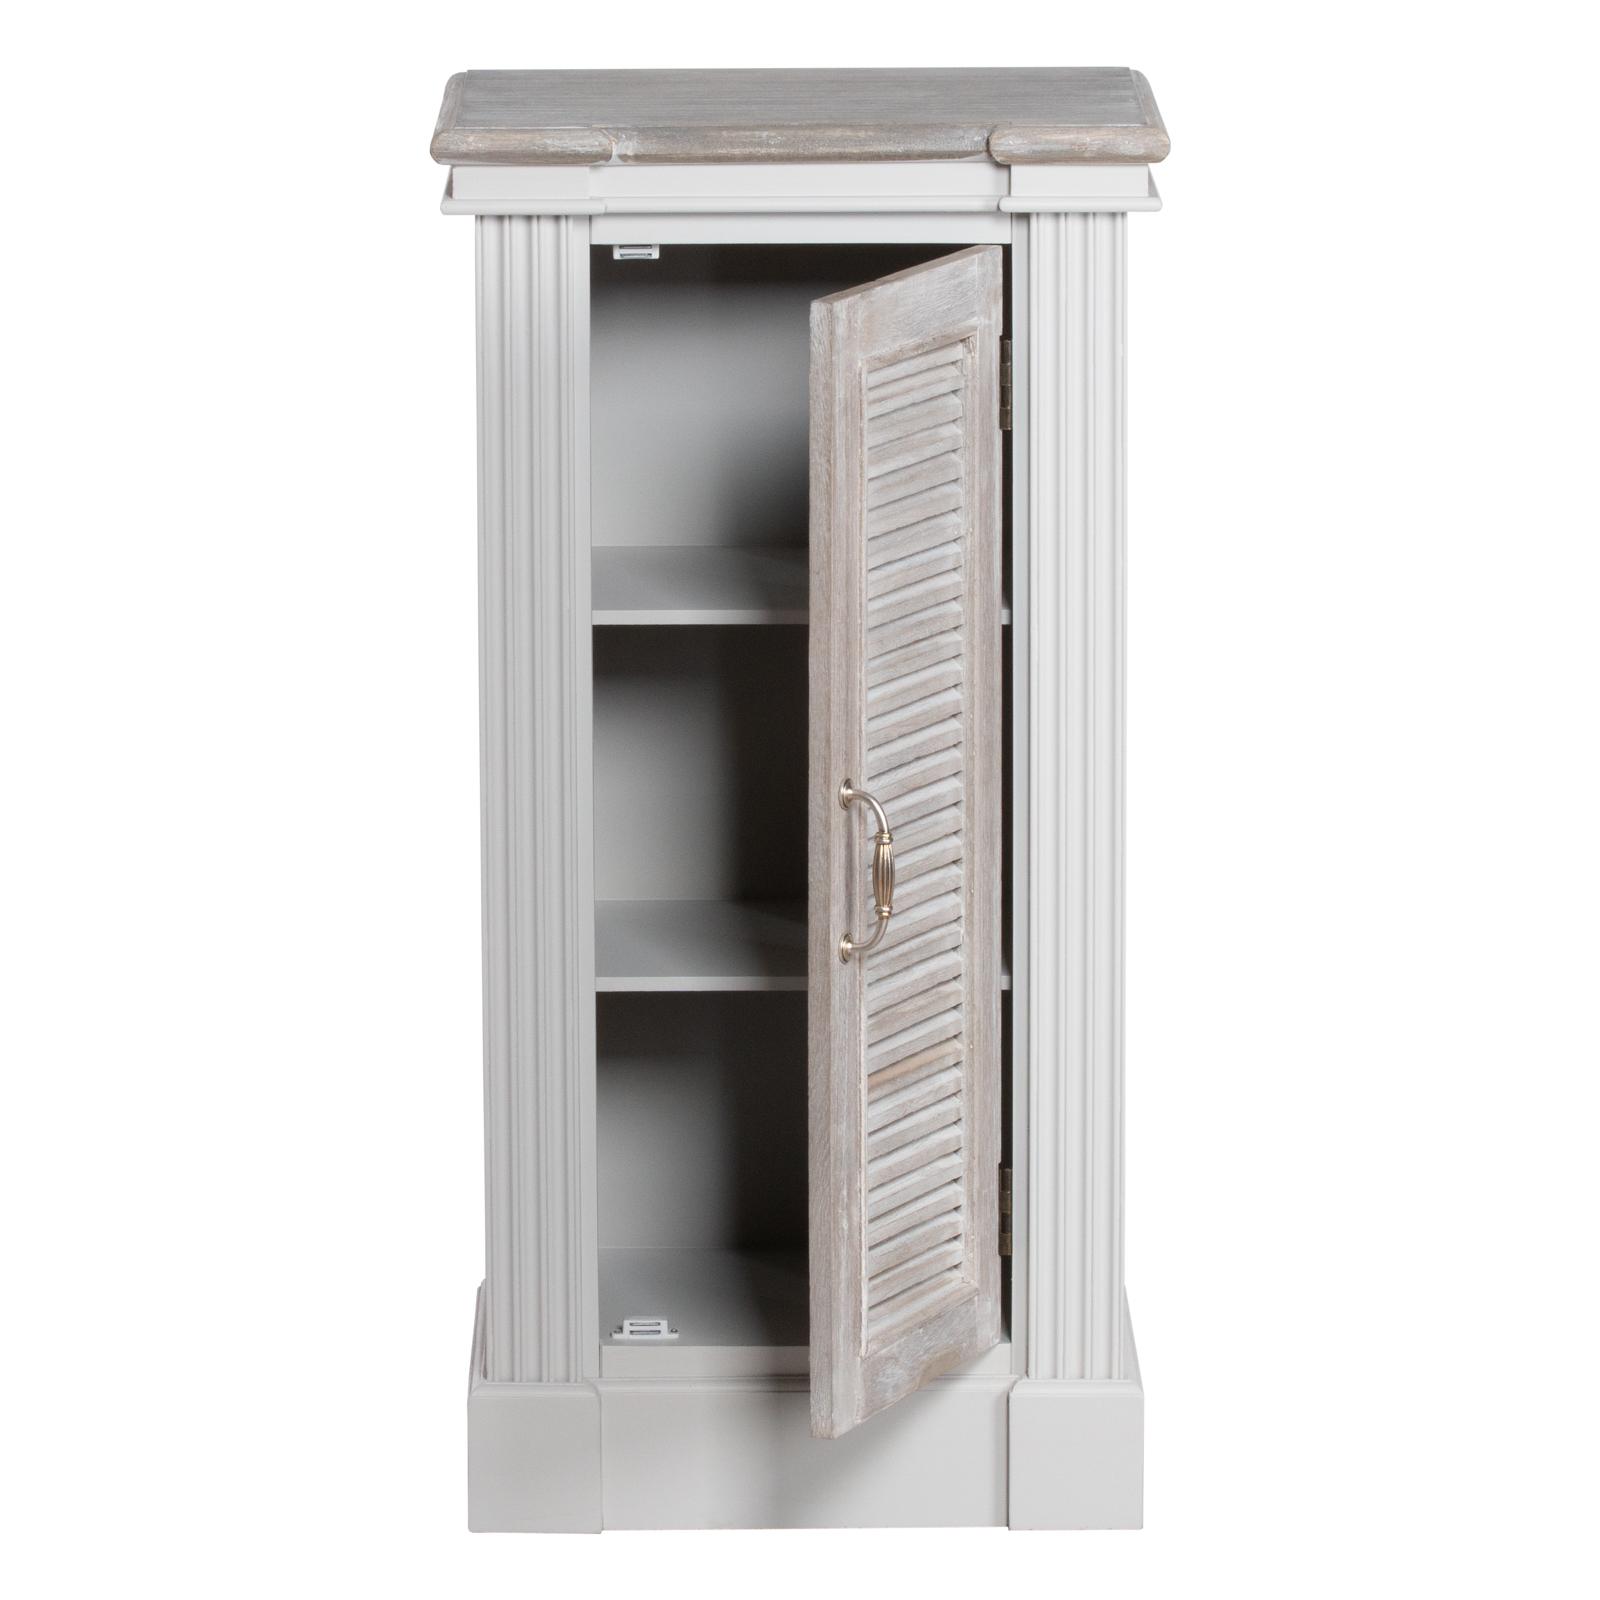 The Liberty Collection Storage Cabinet With Louvered Doors Get